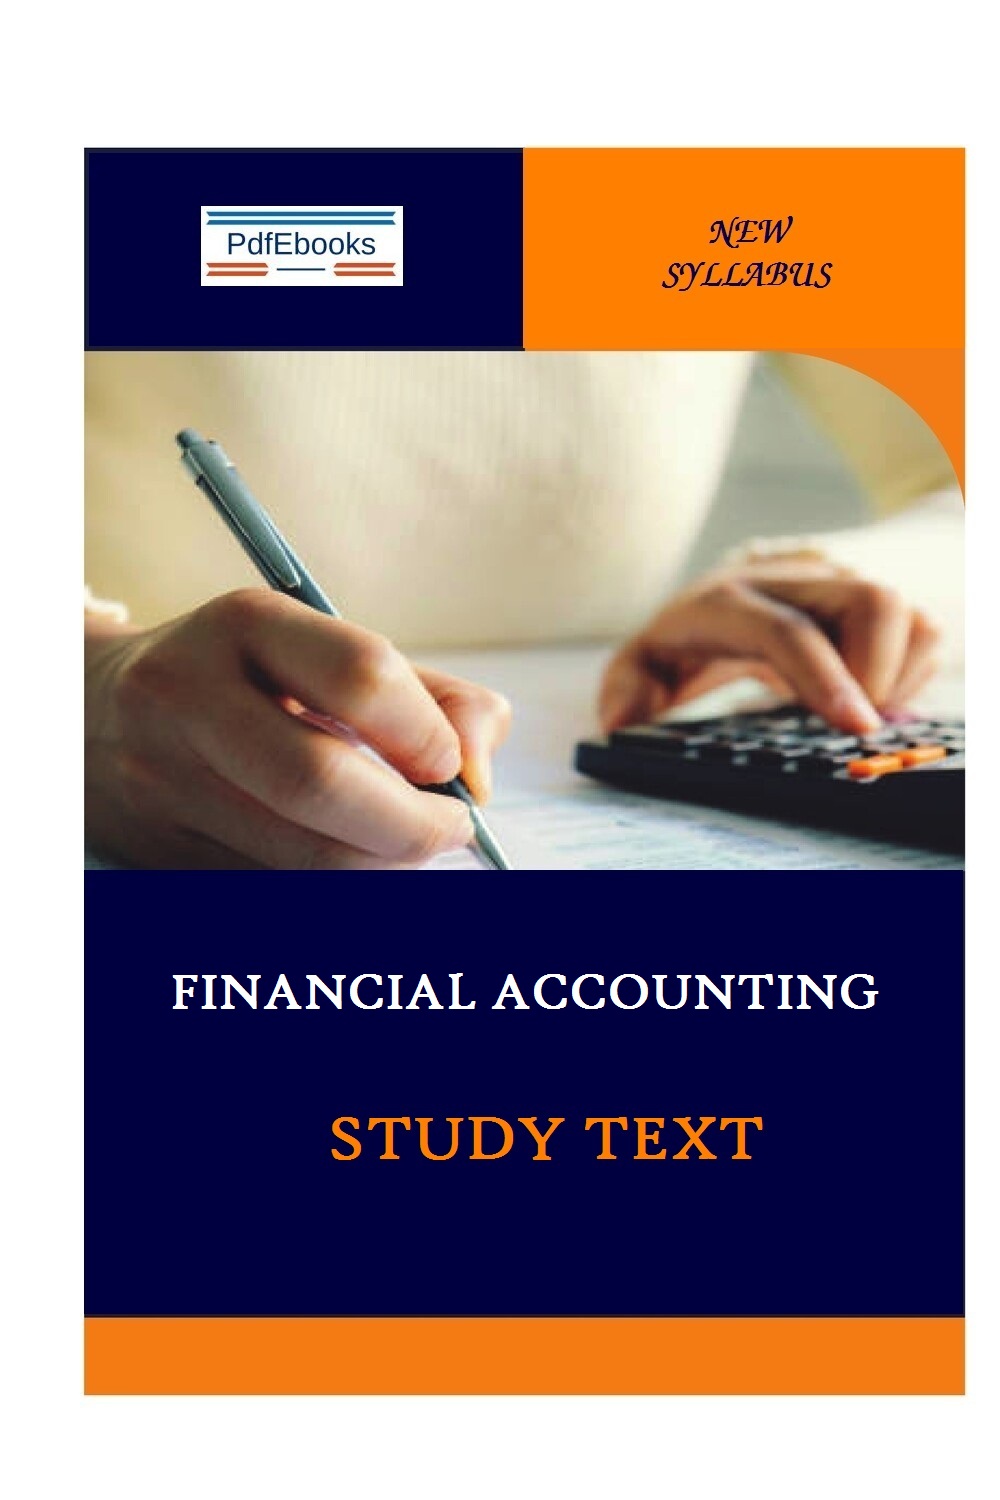 Financial Accounting - CPA PDF Study text notes